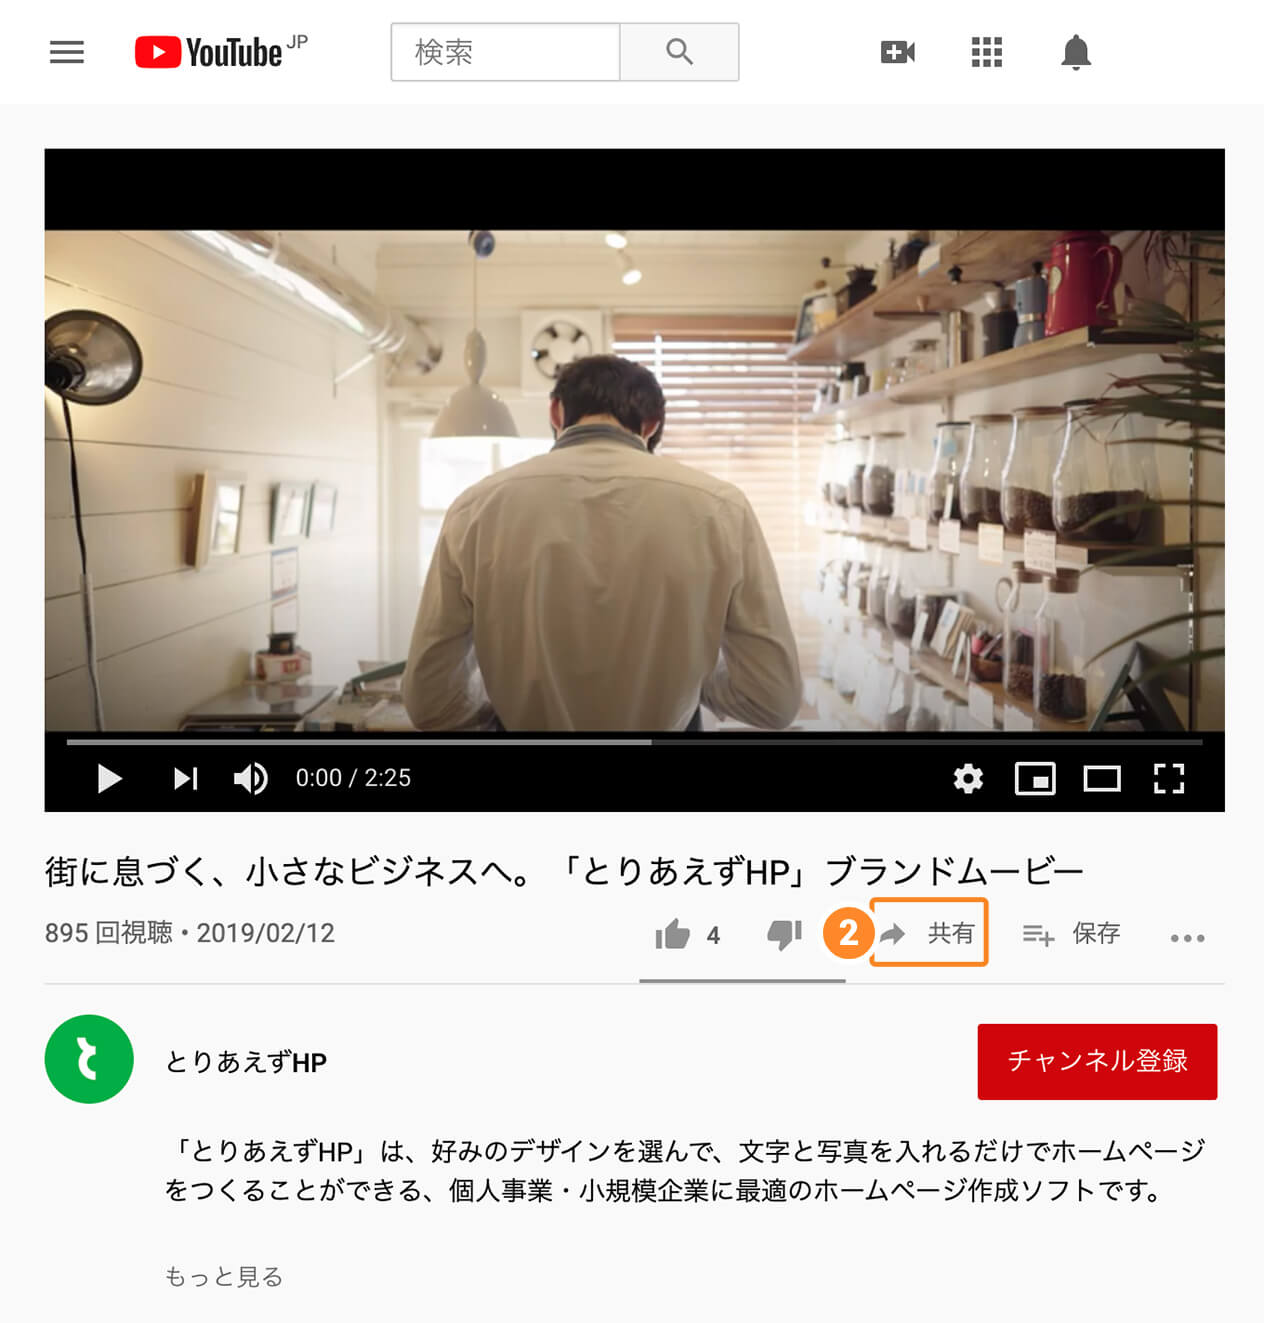 Youtube[埋め込みコード]表示方法画面